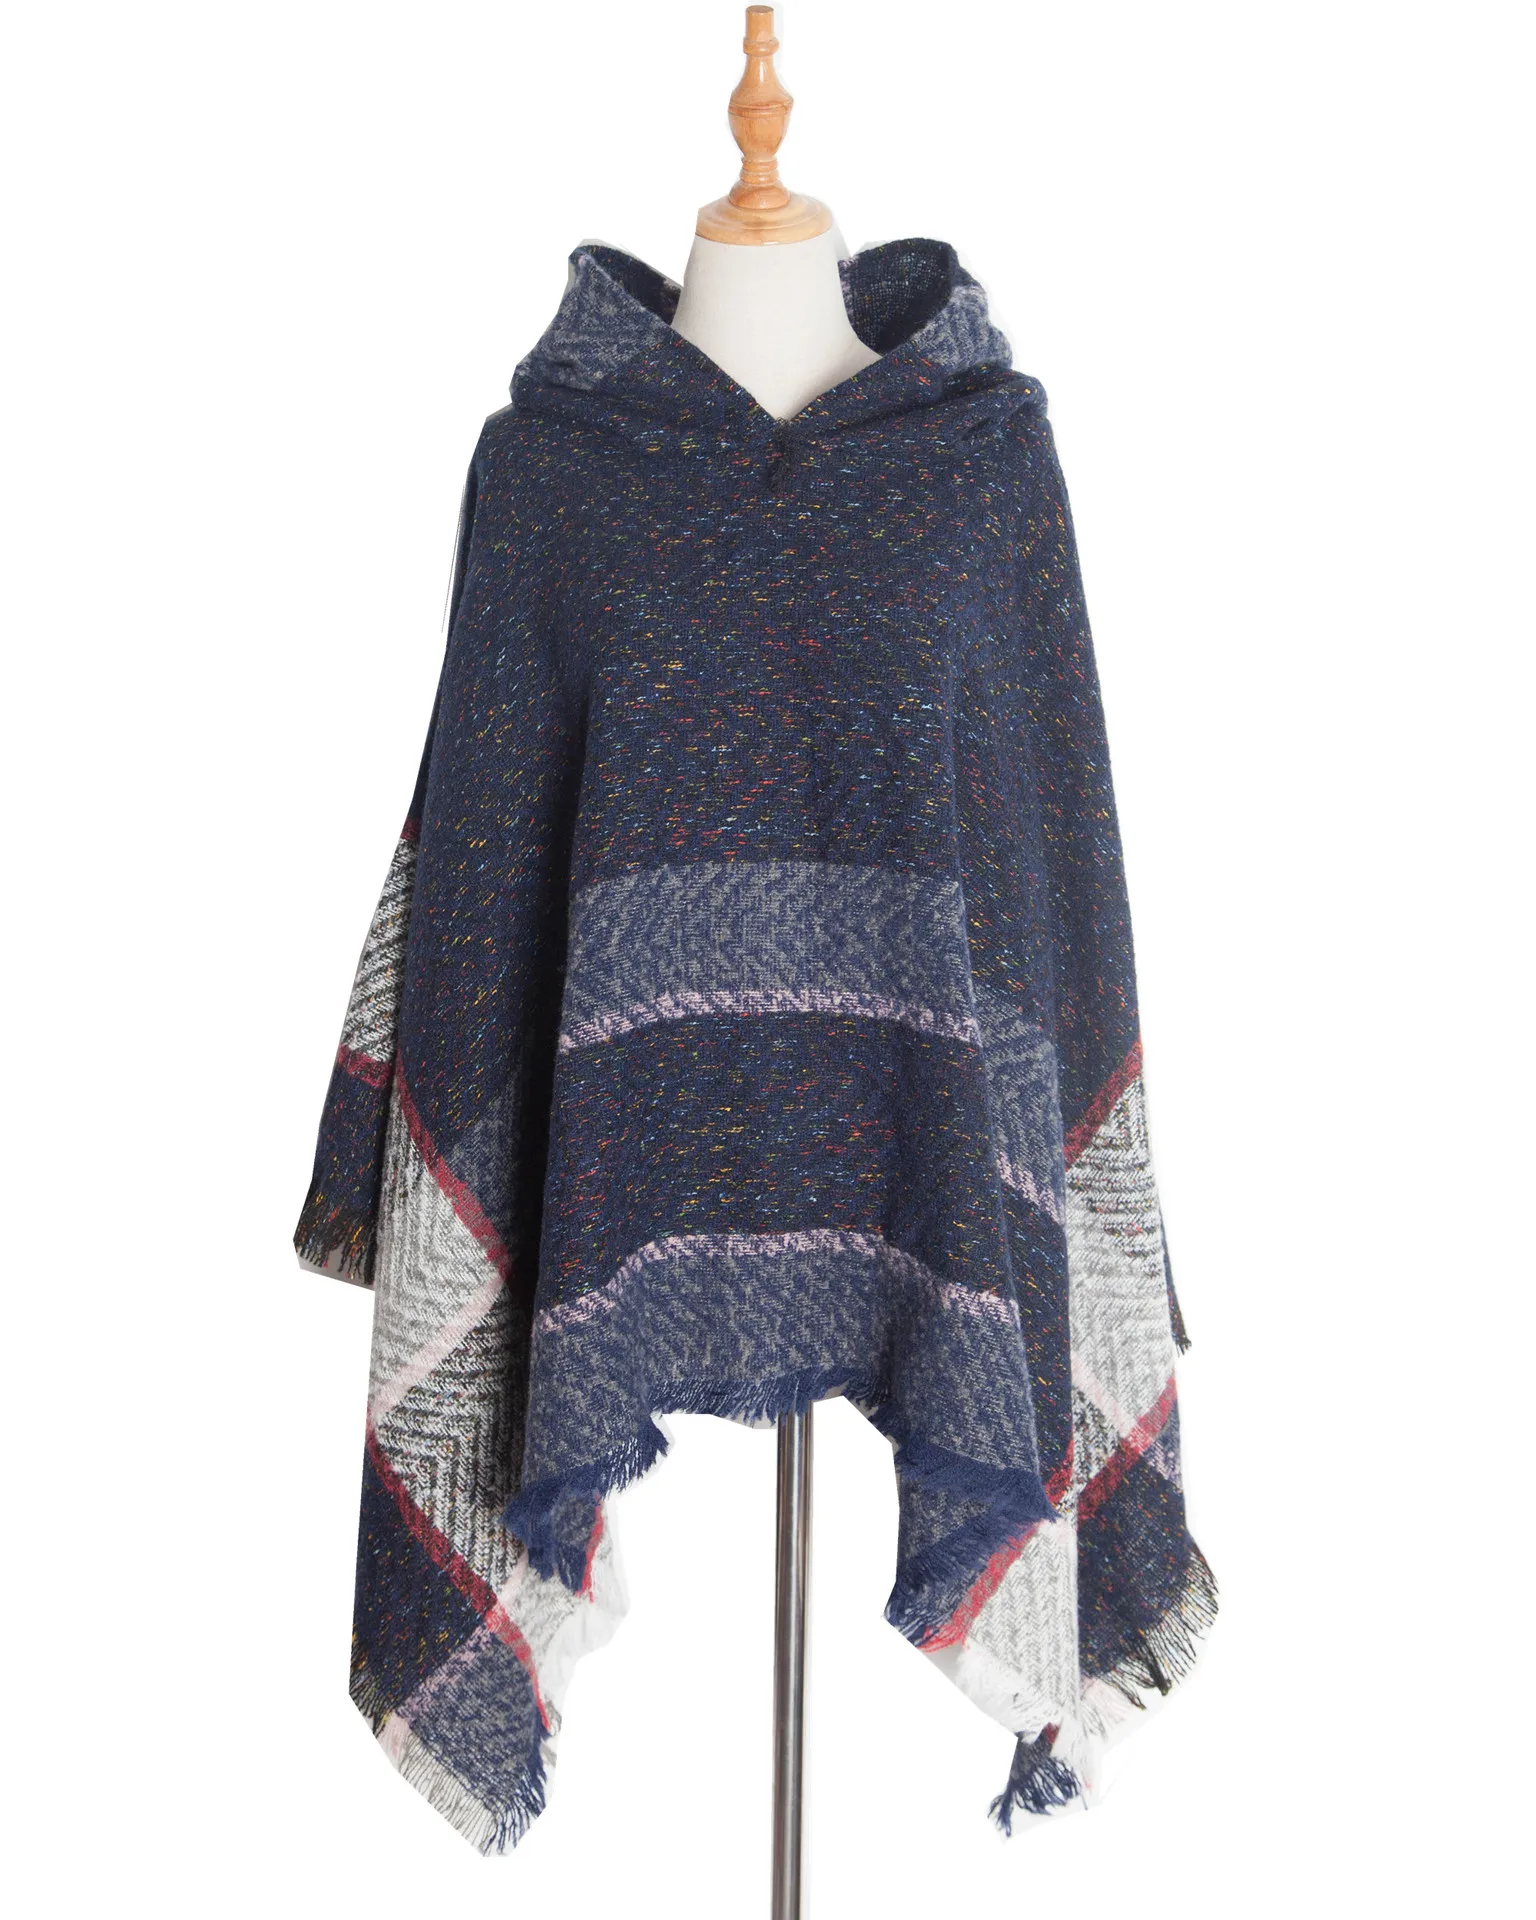 New Autumn Winter Fishbone Pattern Women's Hooded Cape Pullover Cape Women Poncho Lady Capes Navy Cloaks 4 colors women coat poncho autumn winter casual overcoat zipper loose pullover cloak sweater cape outwear 2021 new